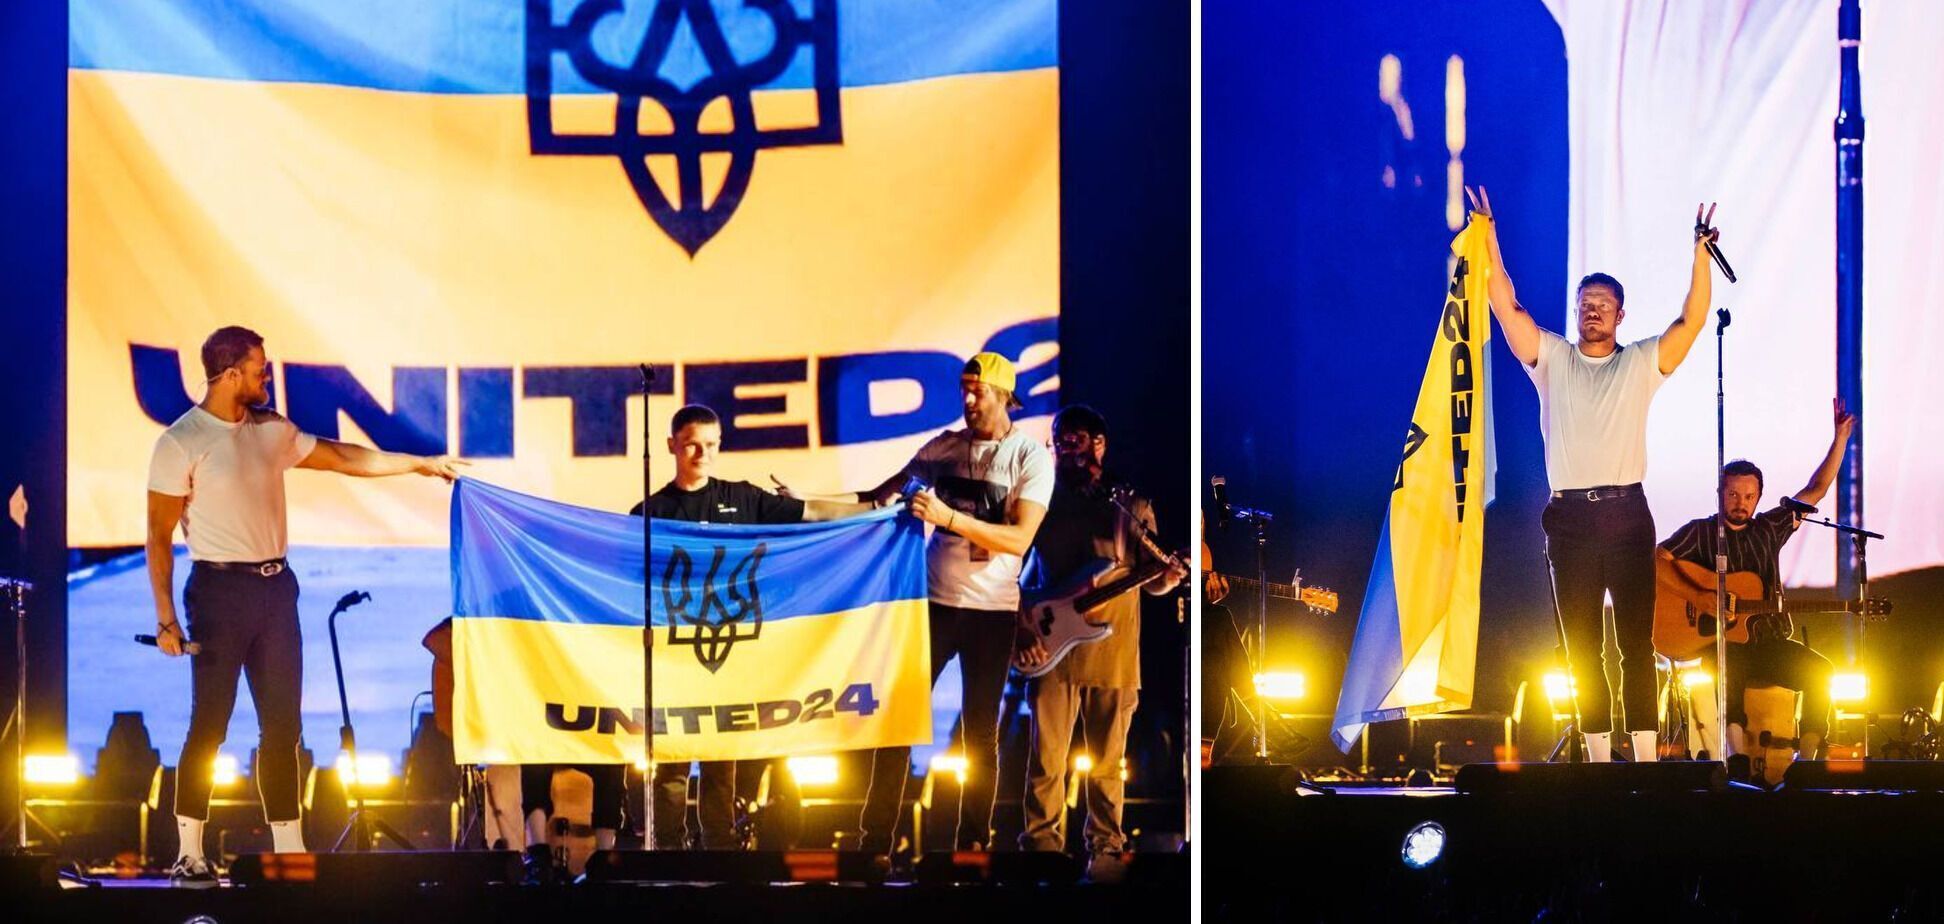 Imagine Dragons scandal in Georgia: a fan was not allowed to unfurl the Ukrainian flag and the musicians did not react